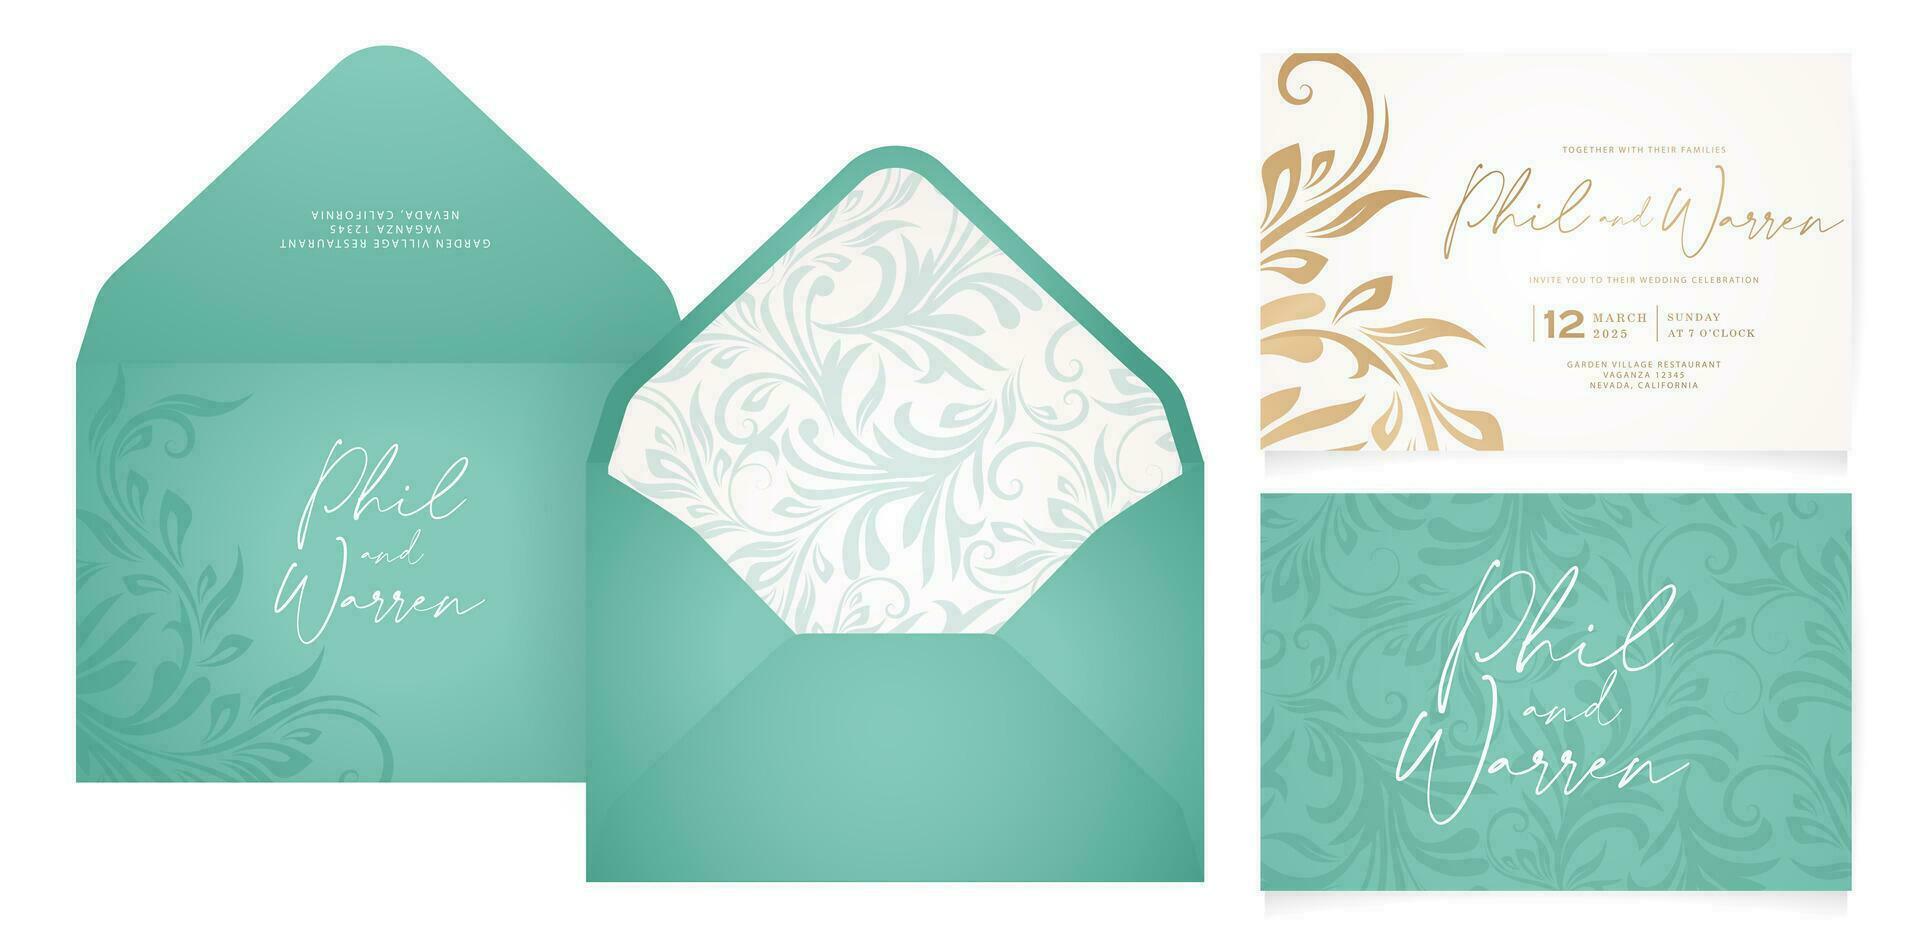 Wedding invitation card template with floral motif design envelope set for greetings cards template, Stationery, Layout, collages, scene designs, event flyers, prints paper materials holiday festivals vector